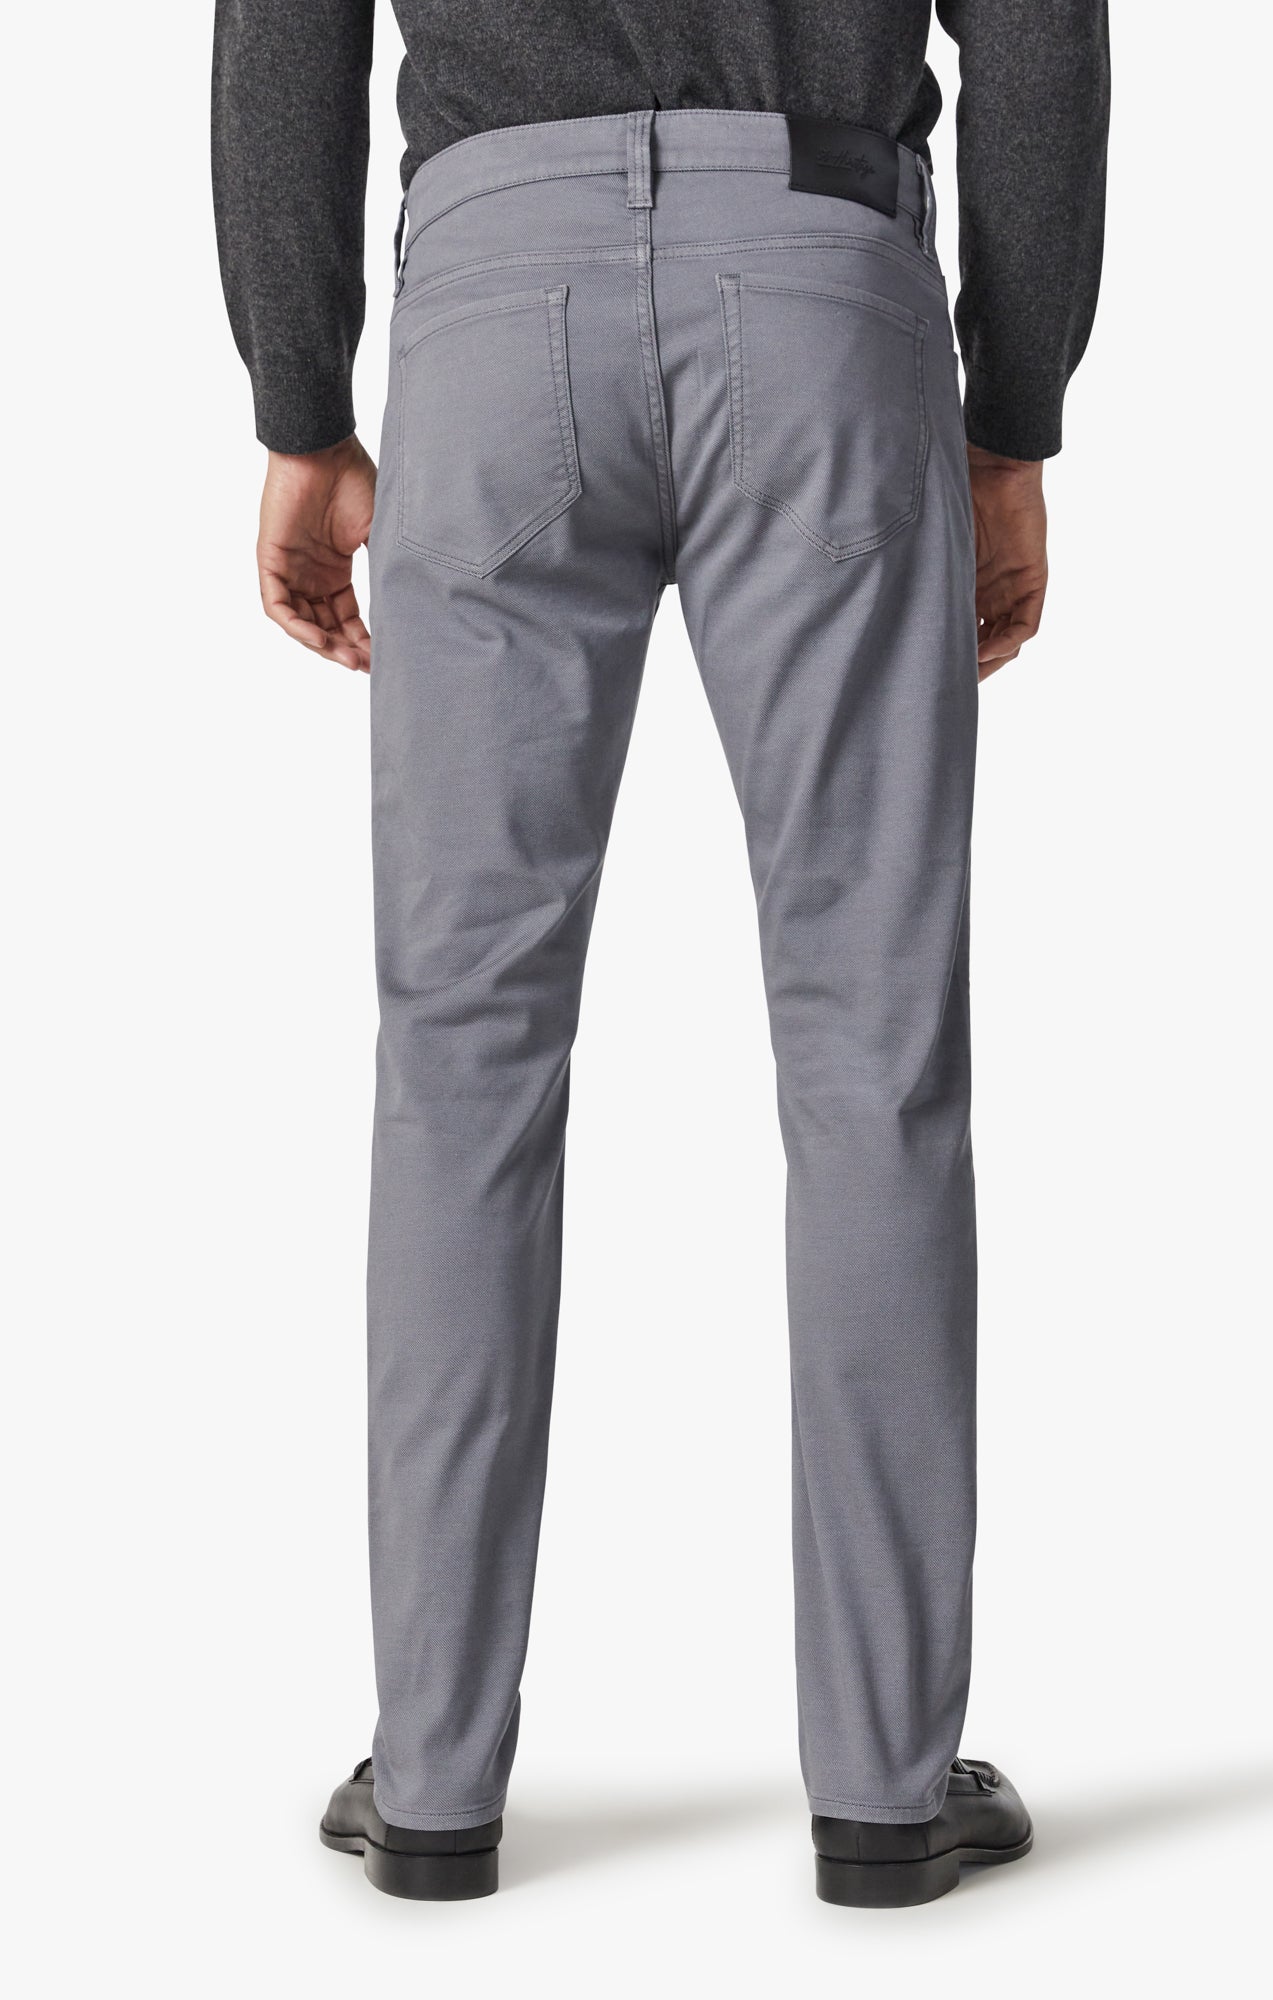 Courage Straight Leg Pants in Stormy CoolMax